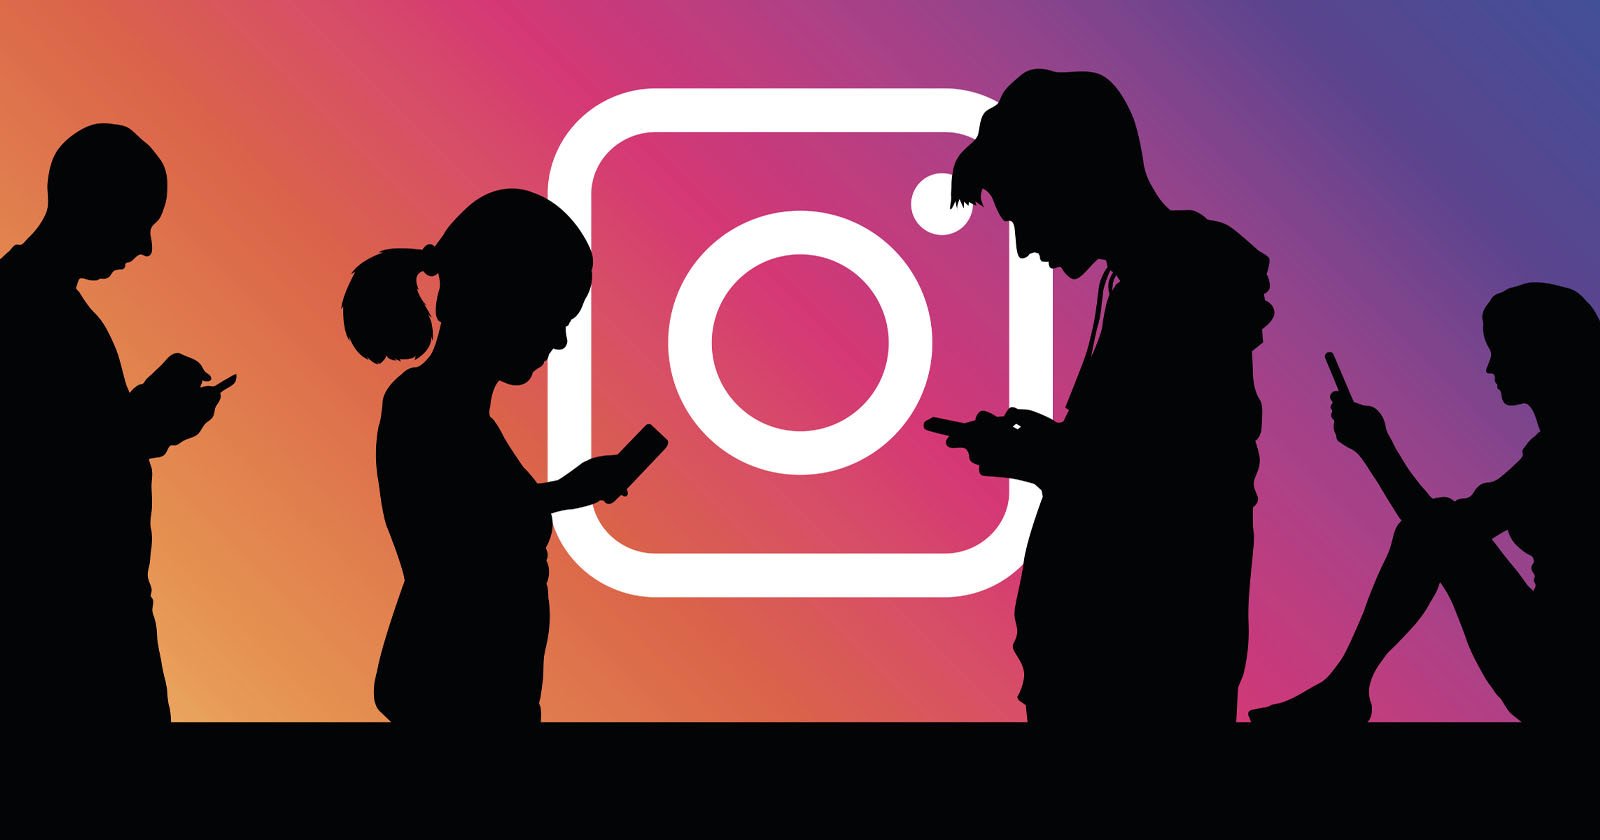  instagram ups minimum daily use time limit encourages 